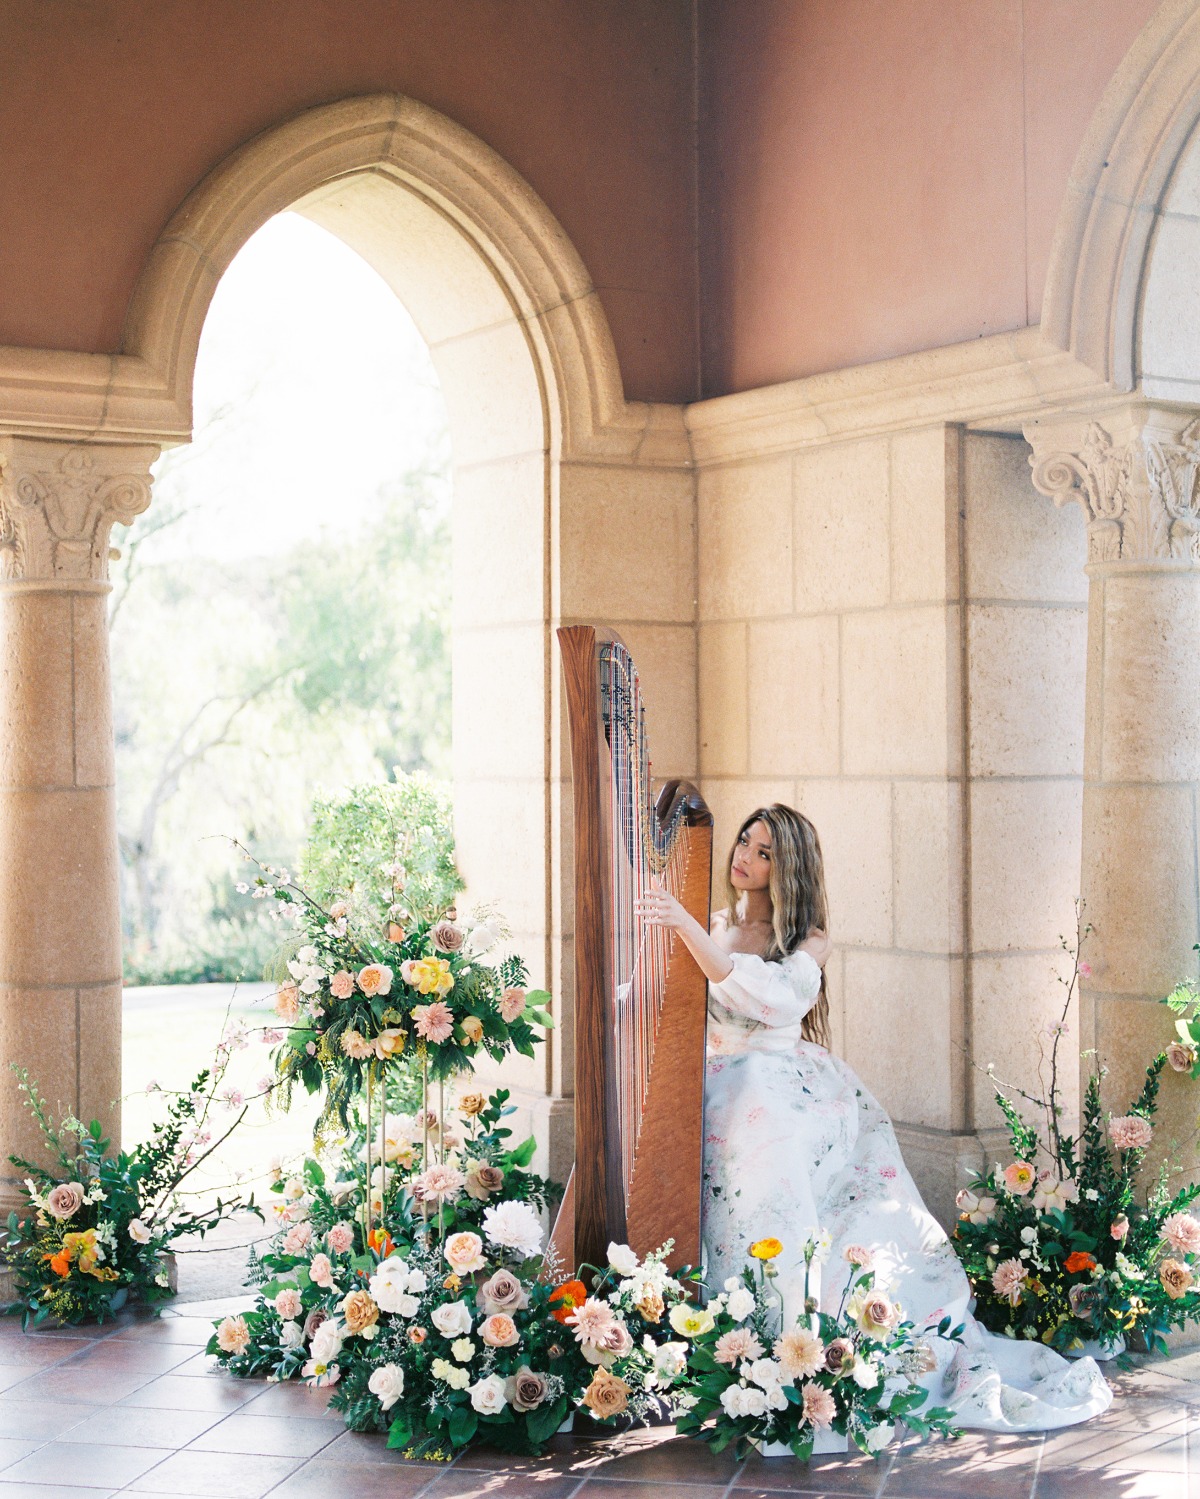 Bride playing a harp among flowers